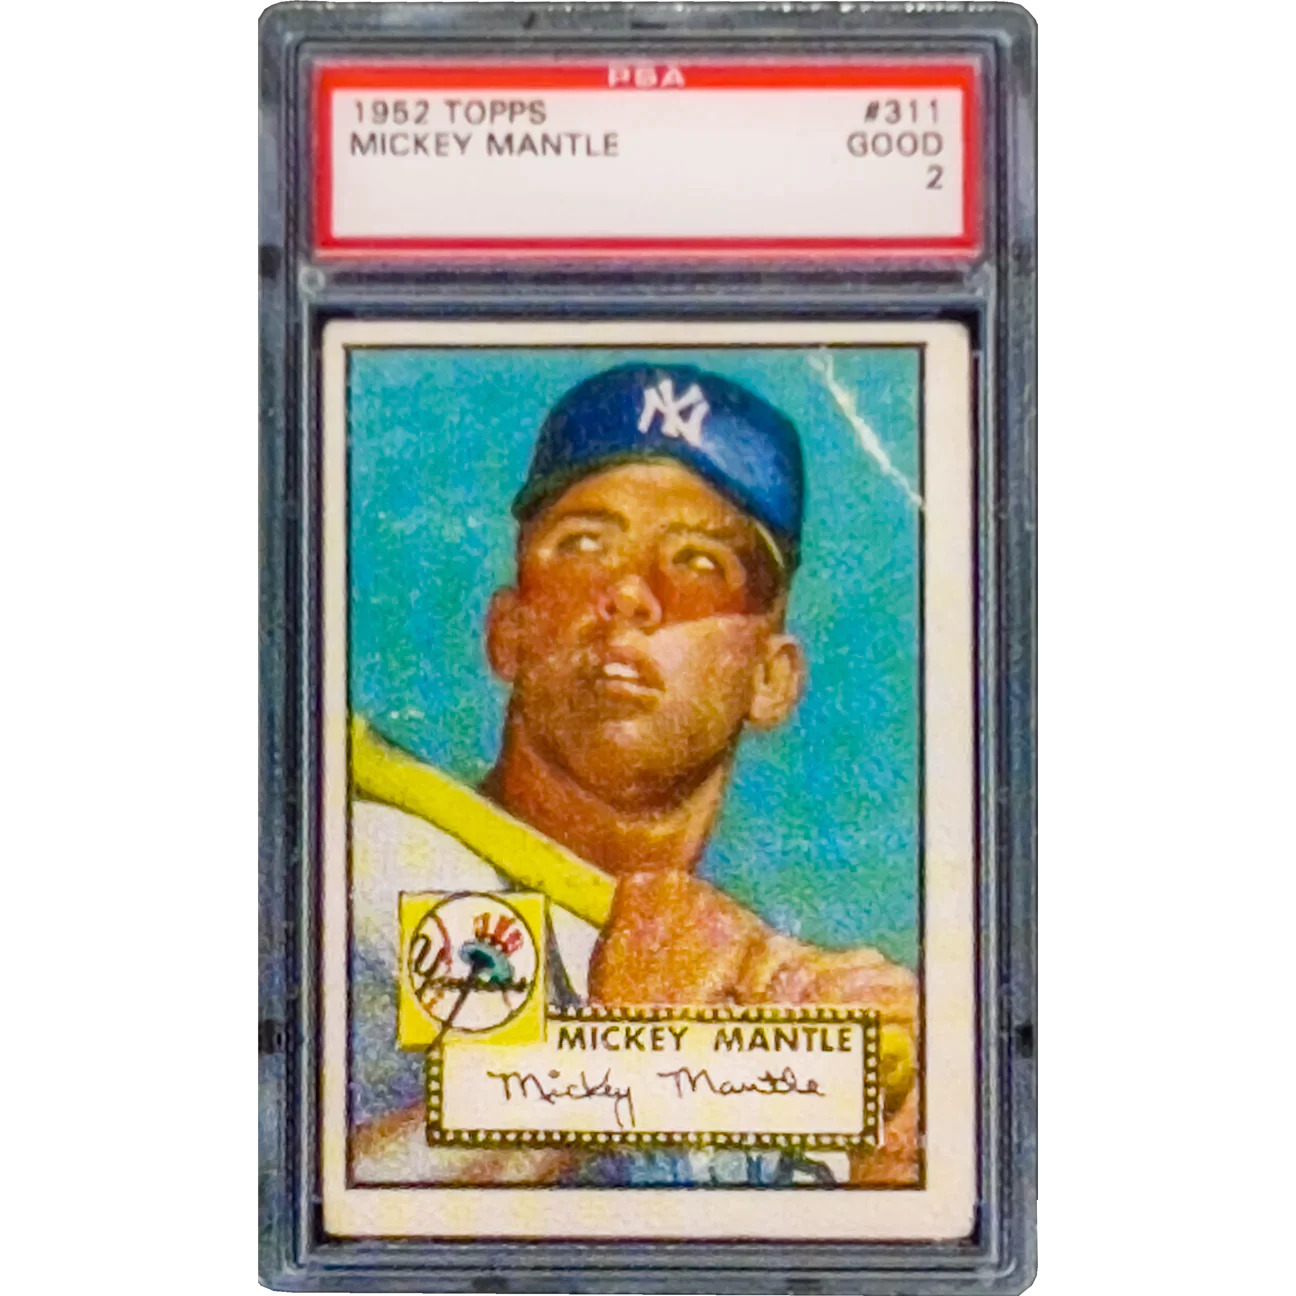 1952 Topps Mickey Mantle PSA 2 Autographed back Rookie Lapel Pin PBX-007-A P-239